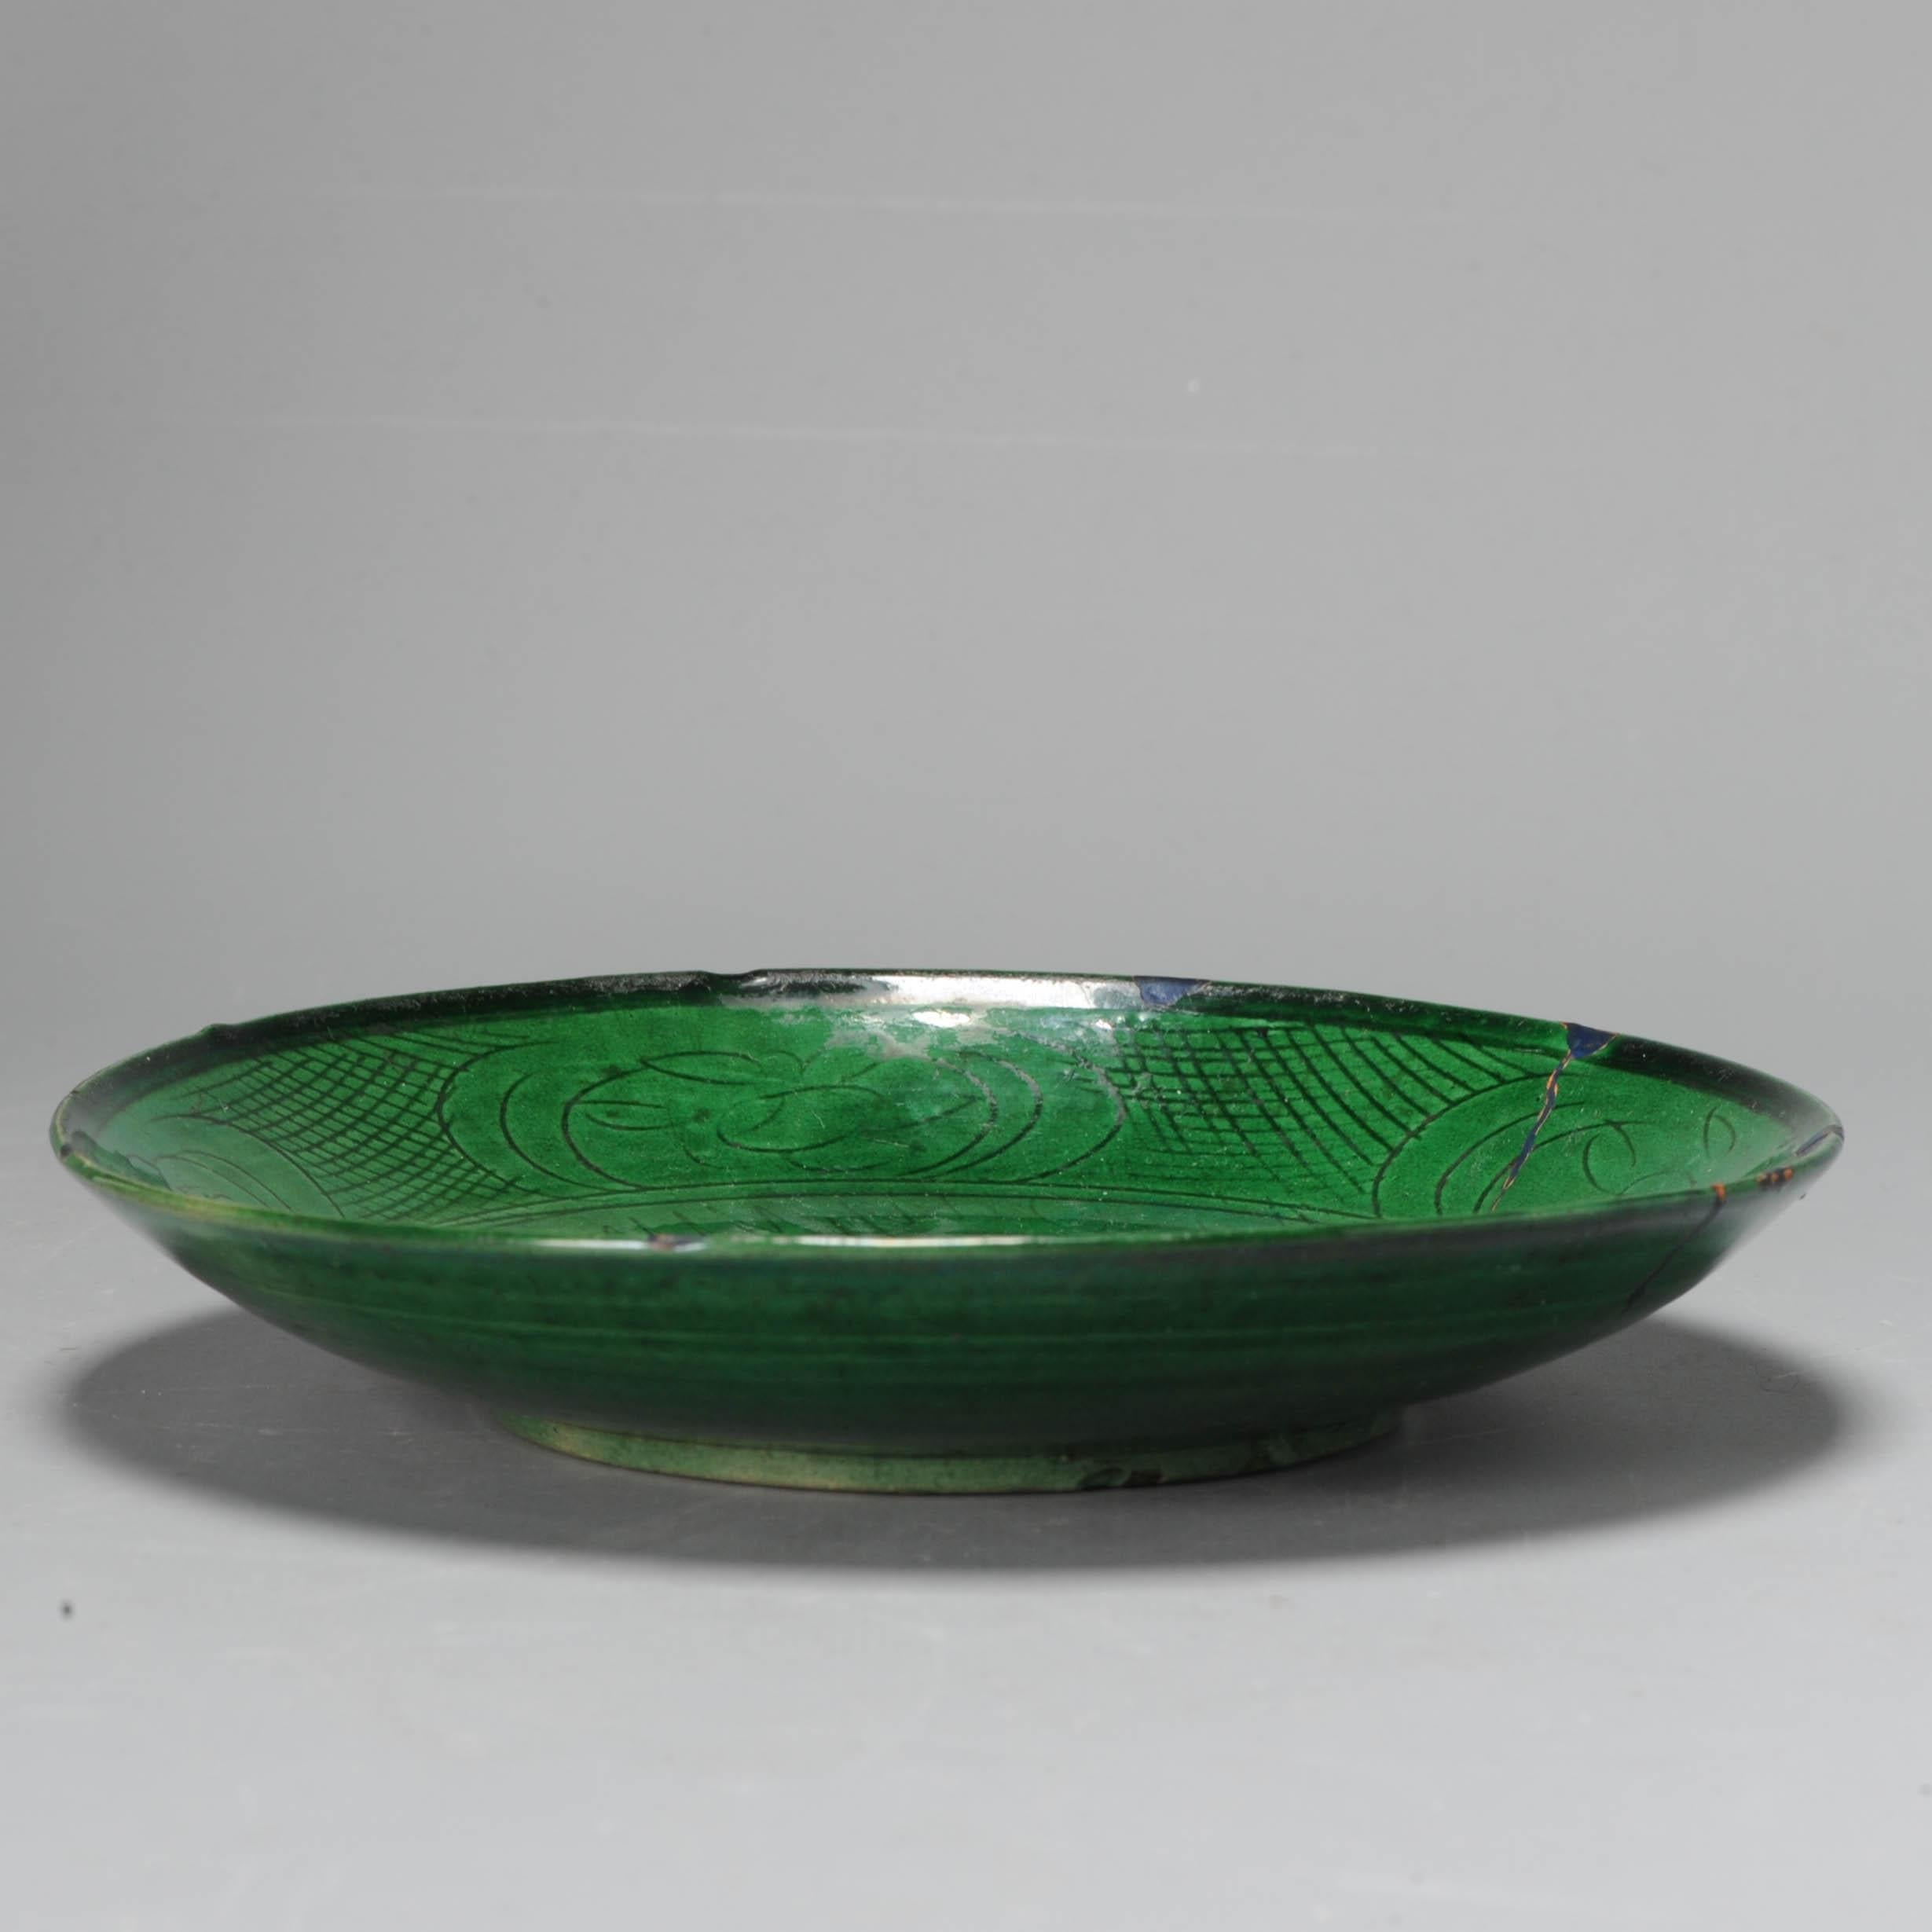 A very nicely decorated plate with beautiful Green Glaze and a carved underglaze scene of a Duck/Goose in a pond. Dated to the late Ming or transitional period.

The back without decoration but fully glazed.

We have found similar dishes (but with